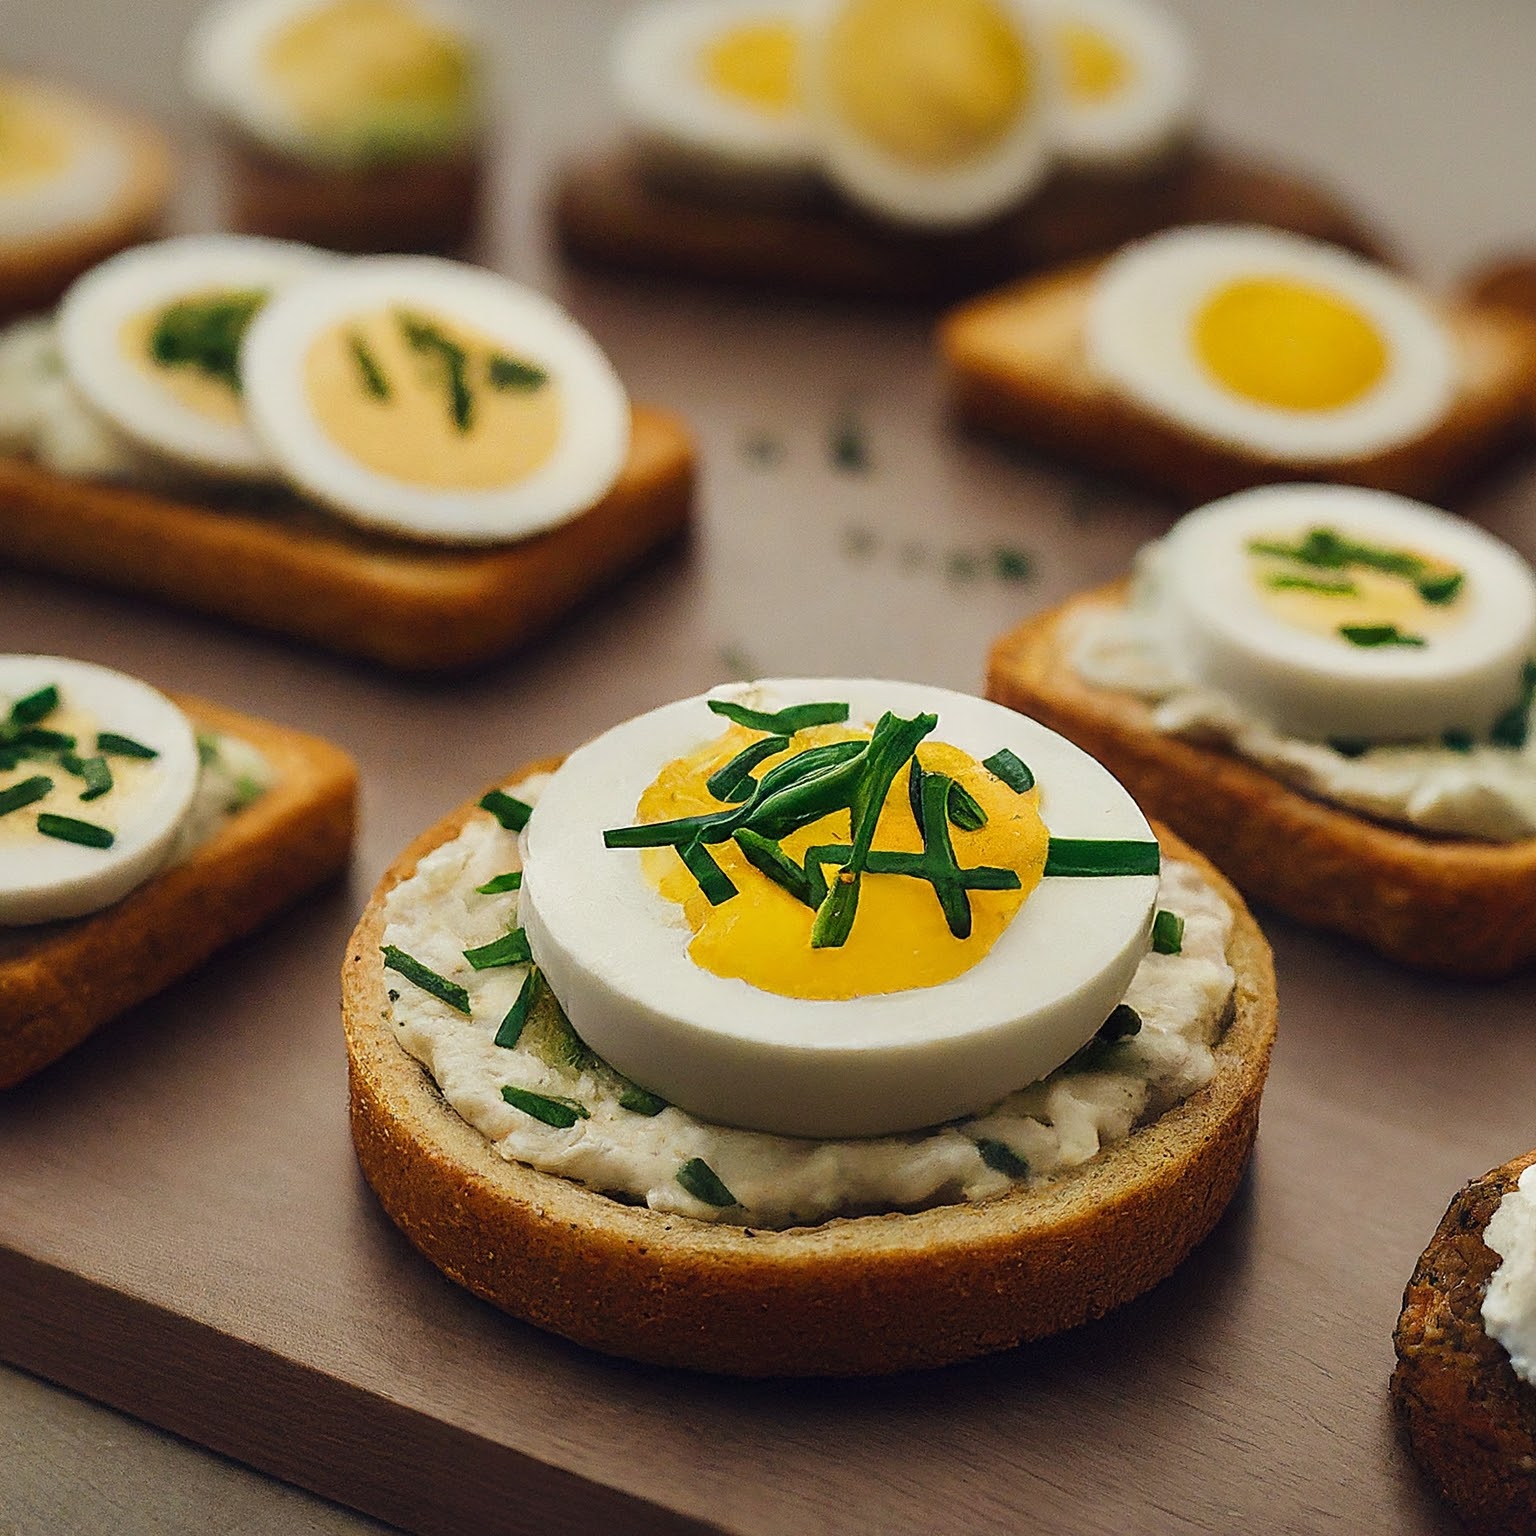 CANAPES WITH EGG AND CHIVES RECIPE: DELICIOUS DELIGHT!